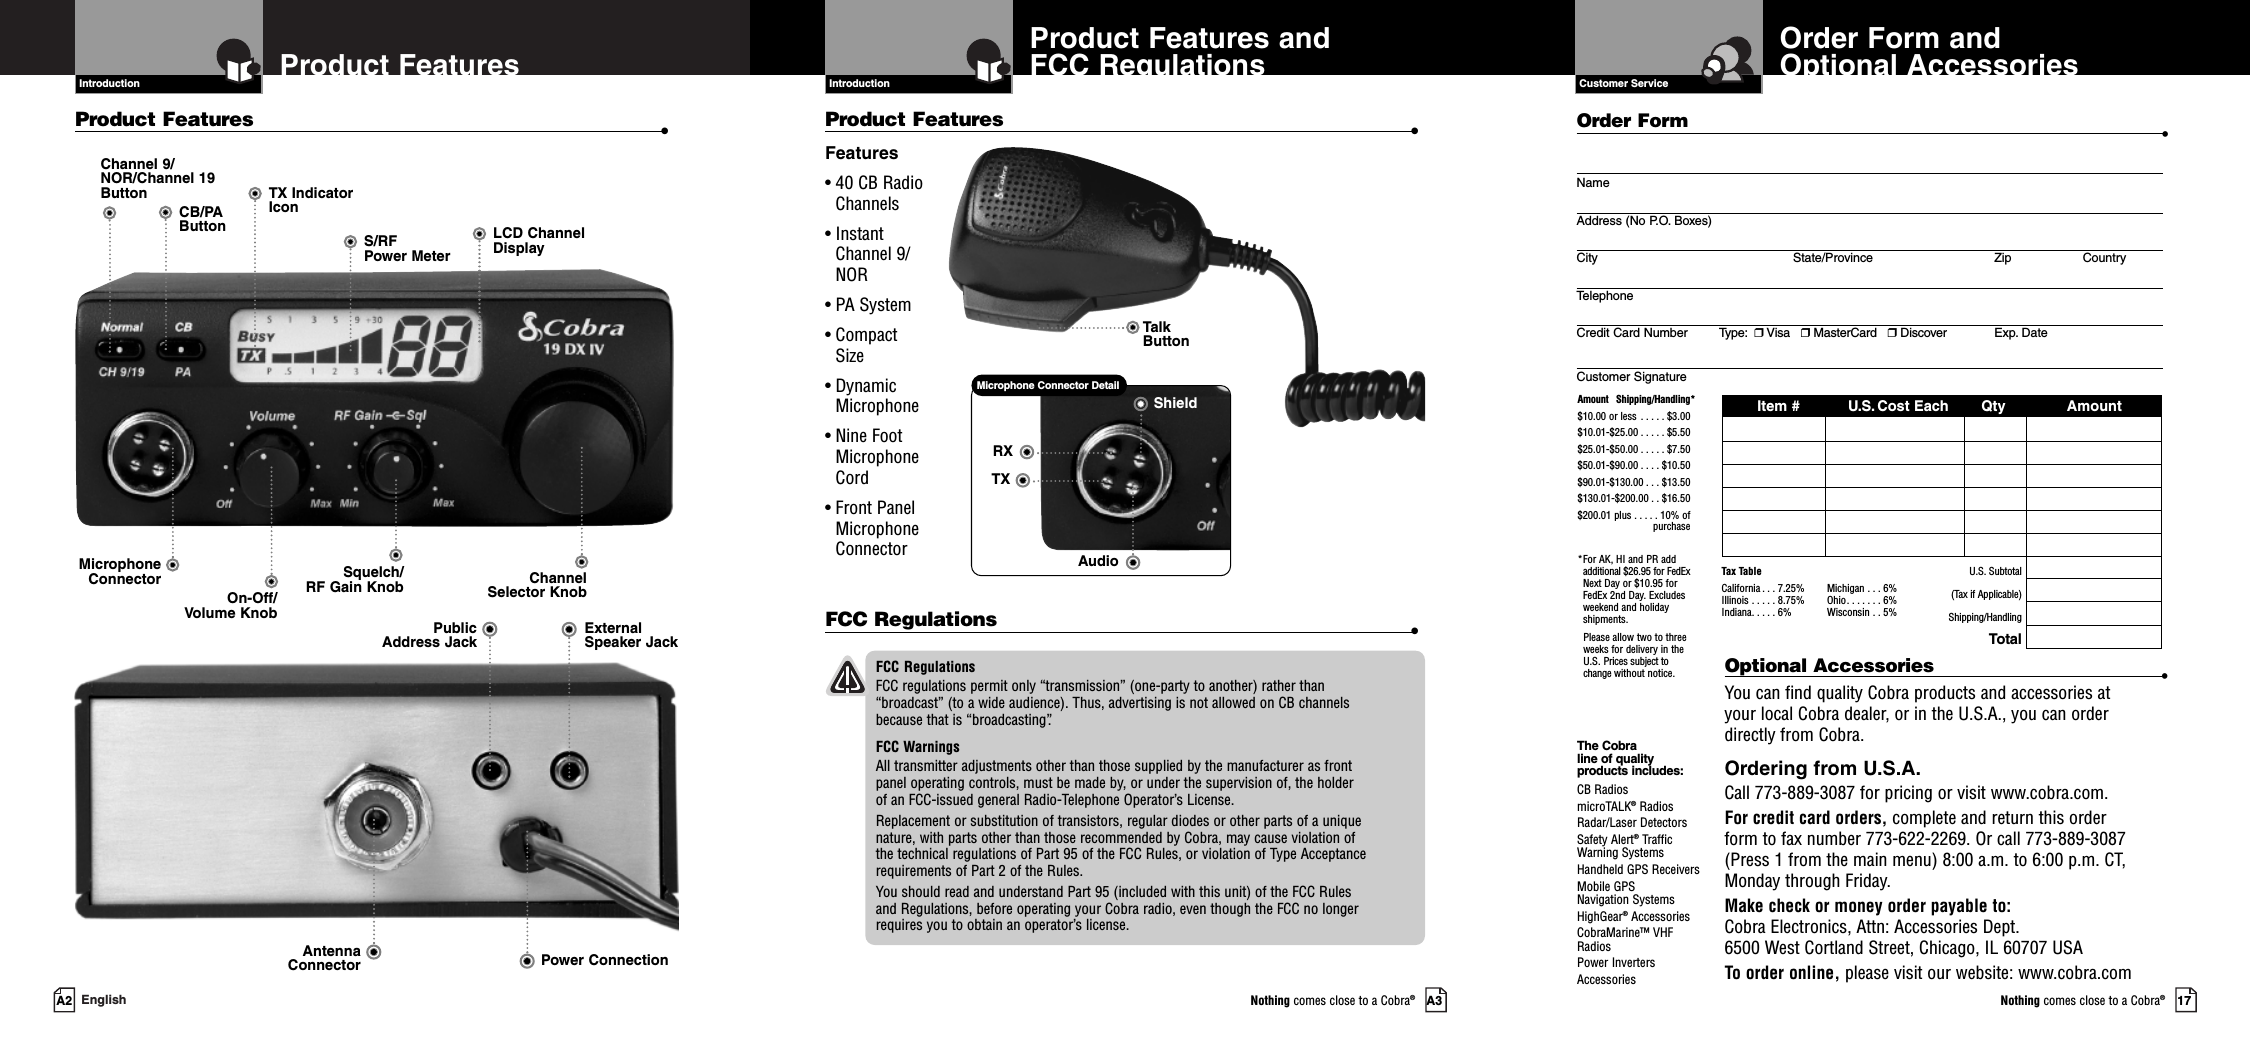 Customer Service17Nothing comes close to a Cobra®Order Form andOptional Accessories IntroductionA3Nothing comes close to a Cobra®Product Features and FCC RegulationsA2 EnglishProduct FeaturesIntroductionChannel 9/NOR/Channel 19 ButtonCB/PAButtonOn-Off/Volume KnobSquelch/RF Gain Knob Channel Selector KnobMicrophoneConnectorTX IndicatorIconS/RF Power MeterLCD ChannelDisplayAntennaConnectorExternalSpeaker JackPublic Address JackPower ConnectionOptional Accessories •You can find quality Cobra products and accessories at your local Cobra dealer, or in the U.S.A., you can order directly from Cobra.Ordering from U.S.A.Call 773-889-3087 for pricing or visit www.cobra.com.For credit card orders, complete and return this order form to fax number 773-622-2269. Or call 773-889-3087(Press 1 from the main menu) 8:00 a.m. to 6:00 p.m. CT, Monday through Friday.Make check or money order payable to:  Cobra Electronics, Attn: Accessories Dept.6500 West Cortland Street, Chicago, IL 60707 USATo order online, please visit our website: www.cobra.comThe Cobra line of qualityproducts includes:CB RadiosmicroTALK®RadiosRadar/Laser Detectors Safety Alert®Traffic Warning SystemsHandheld GPS ReceiversMobile GPS Navigation SystemsHighGear®Accessories  CobraMarine™ VHFRadios  Power InvertersAccessoriesOrder Form •NameAddress (No P.O. Boxes)City State/Province Zip CountryTelephoneCredit Card Number Type: ❒Visa   ❒MasterCard   ❒Discover Exp. DateCustomer SignatureItem # U.S. Cost Each Qty AmountU.S. Subtotal(Tax if Applicable)Shipping/HandlingTotalAmount Shipping/Handling*$10.00 or less . . . . . $3.00$10.01-$25.00 . . . . . $5.50$25.01-$50.00 . . . . . $7.50$50.01-$90.00 . . . . $10.50$90.01-$130.00 . . . $13.50$130.01-$200.00 . . $16.50$200.01 plus . . . . . 10% ofpurchase*For AK, HI and PR addadditional $26.95 for FedExNext Day or $10.95 forFedEx 2nd Day. Excludesweekend and holidayshipments.Please allow two to threeweeks for delivery in theU.S. Prices subject tochange without notice.Tax TableCalifornia . . . 7.25%Illinois . . . . . 8.75%Indiana. . . . . 6%Michigan . . . 6%Ohio. . . . . . . 6%Wisconsin . . 5%Product Features •Product Features •Features• 40 CB Radio Channels• Instant Channel 9/NOR• PA System• Compact Size• Dynamic Microphone• Nine Foot Microphone Cord• Front Panel Microphone ConnectorFCC Regulations •FCC RegulationsFCC regulations permit only “transmission” (one-party to another) rather than “broadcast” (to a wide audience). Thus, advertising is not allowed on CB channels because that is “broadcasting”.FCC WarningsAll transmitter adjustments other than those supplied by the manufacturer as front panel operating controls, must be made by, or under the supervision of, the holder of an FCC-issued general Radio-Telephone Operator’s License.Replacement or substitution of transistors, regular diodes or other parts of a unique nature, with parts other than those recommended by Cobra, may cause violation of the technical regulations of Part 95 of the FCC Rules, or violation of Type Acceptancerequirements of Part 2 of the Rules.You should read and understand Part 95 (included with this unit) of the FCC Rules and Regulations, before operating your Cobra radio, even though the FCC no longer requires you to obtain an operator’s license.RXTXAudioShieldMicrophone Connector DetailTalk Button